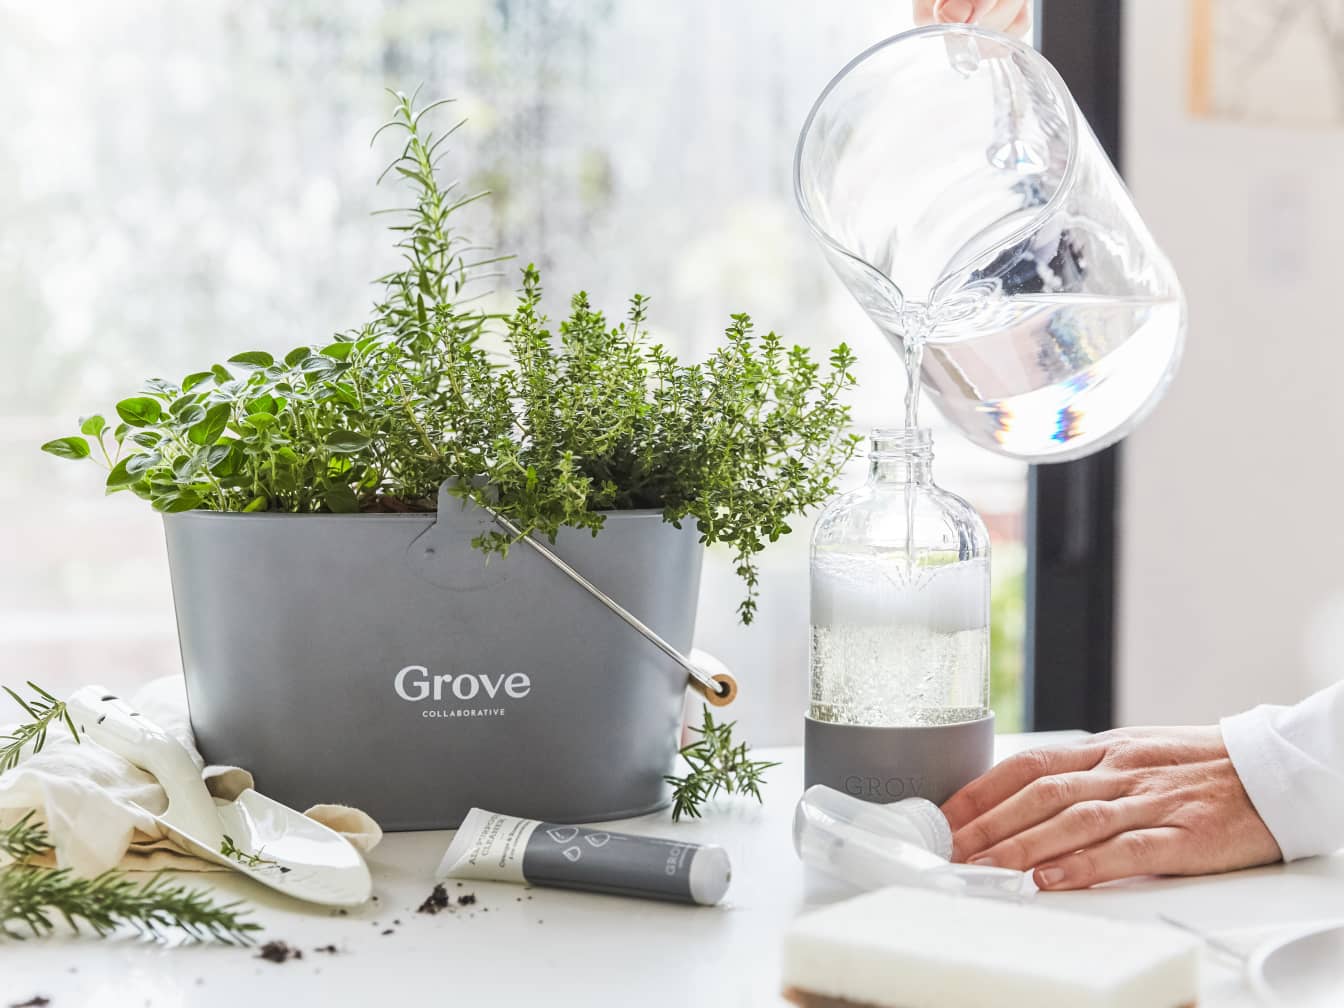 Grove Collaborative Makes Shopping at Home Easy, Affordable and Clean!